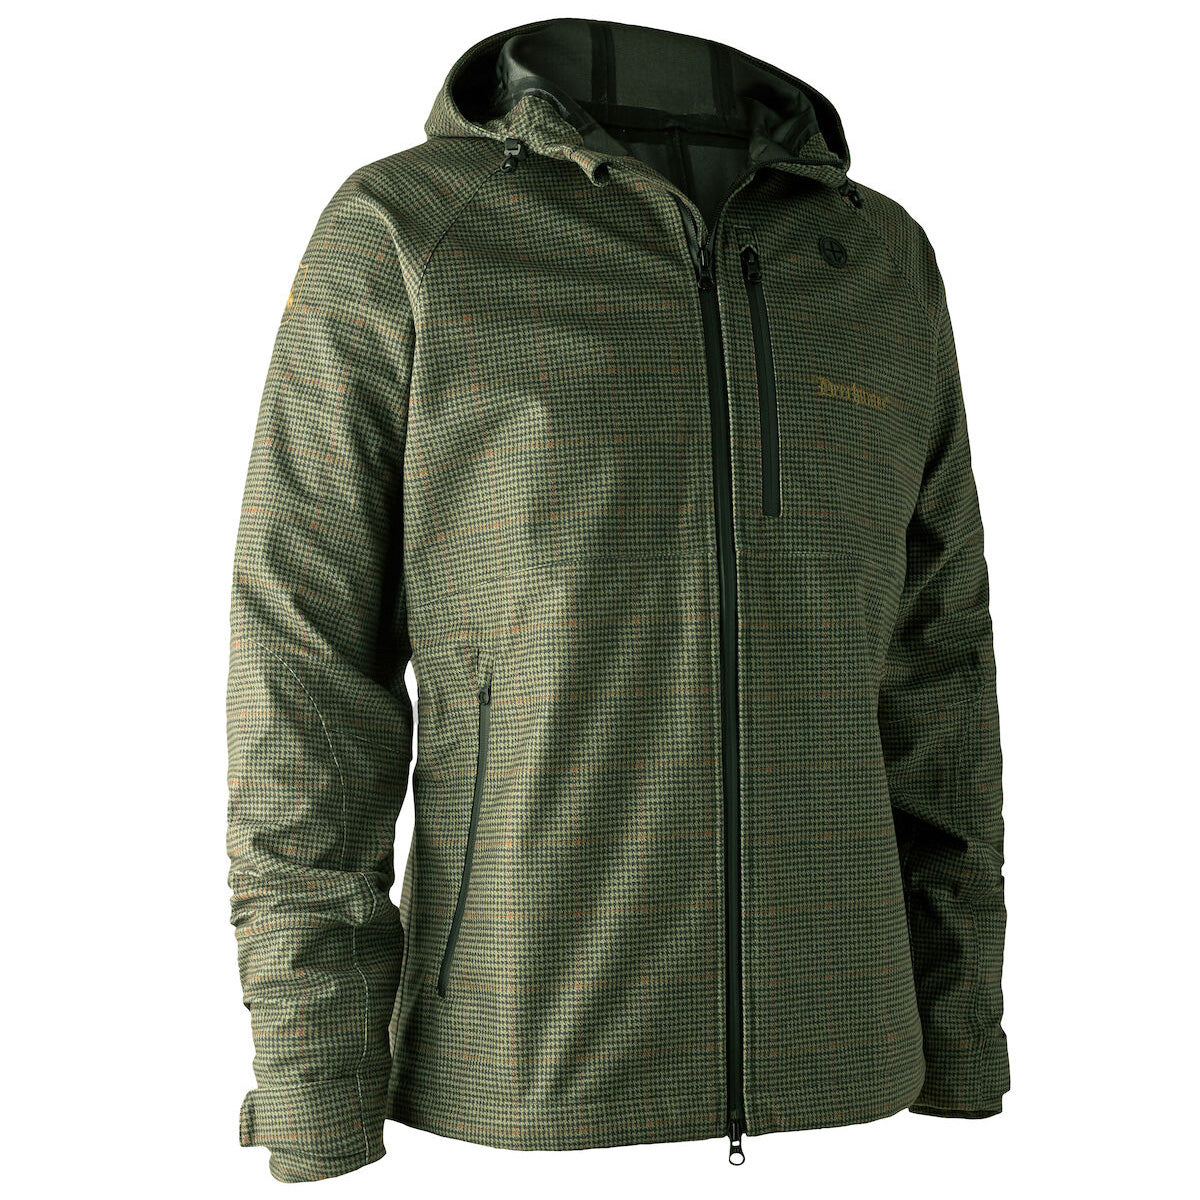 Deerhunter Pro Gamekeeper Jacket - Short in green red mills outdoor pursuits hunting clothing and accessories